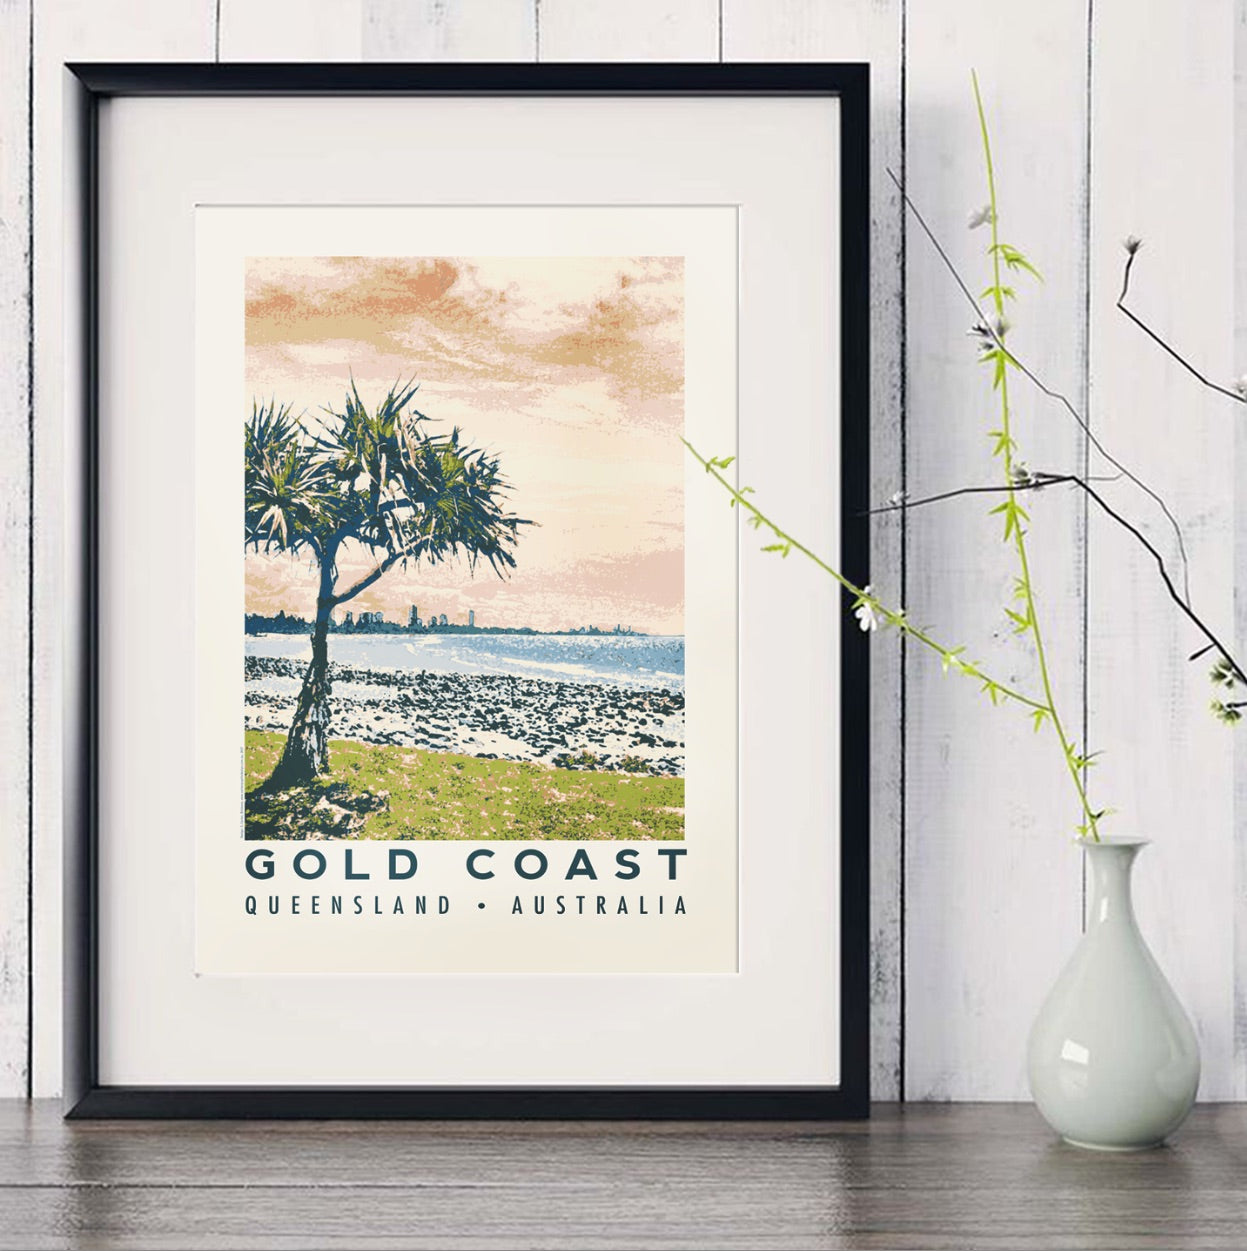 Queensland Gold Coast Poster 'Burleigh Heads' A4 in black frame with white vase